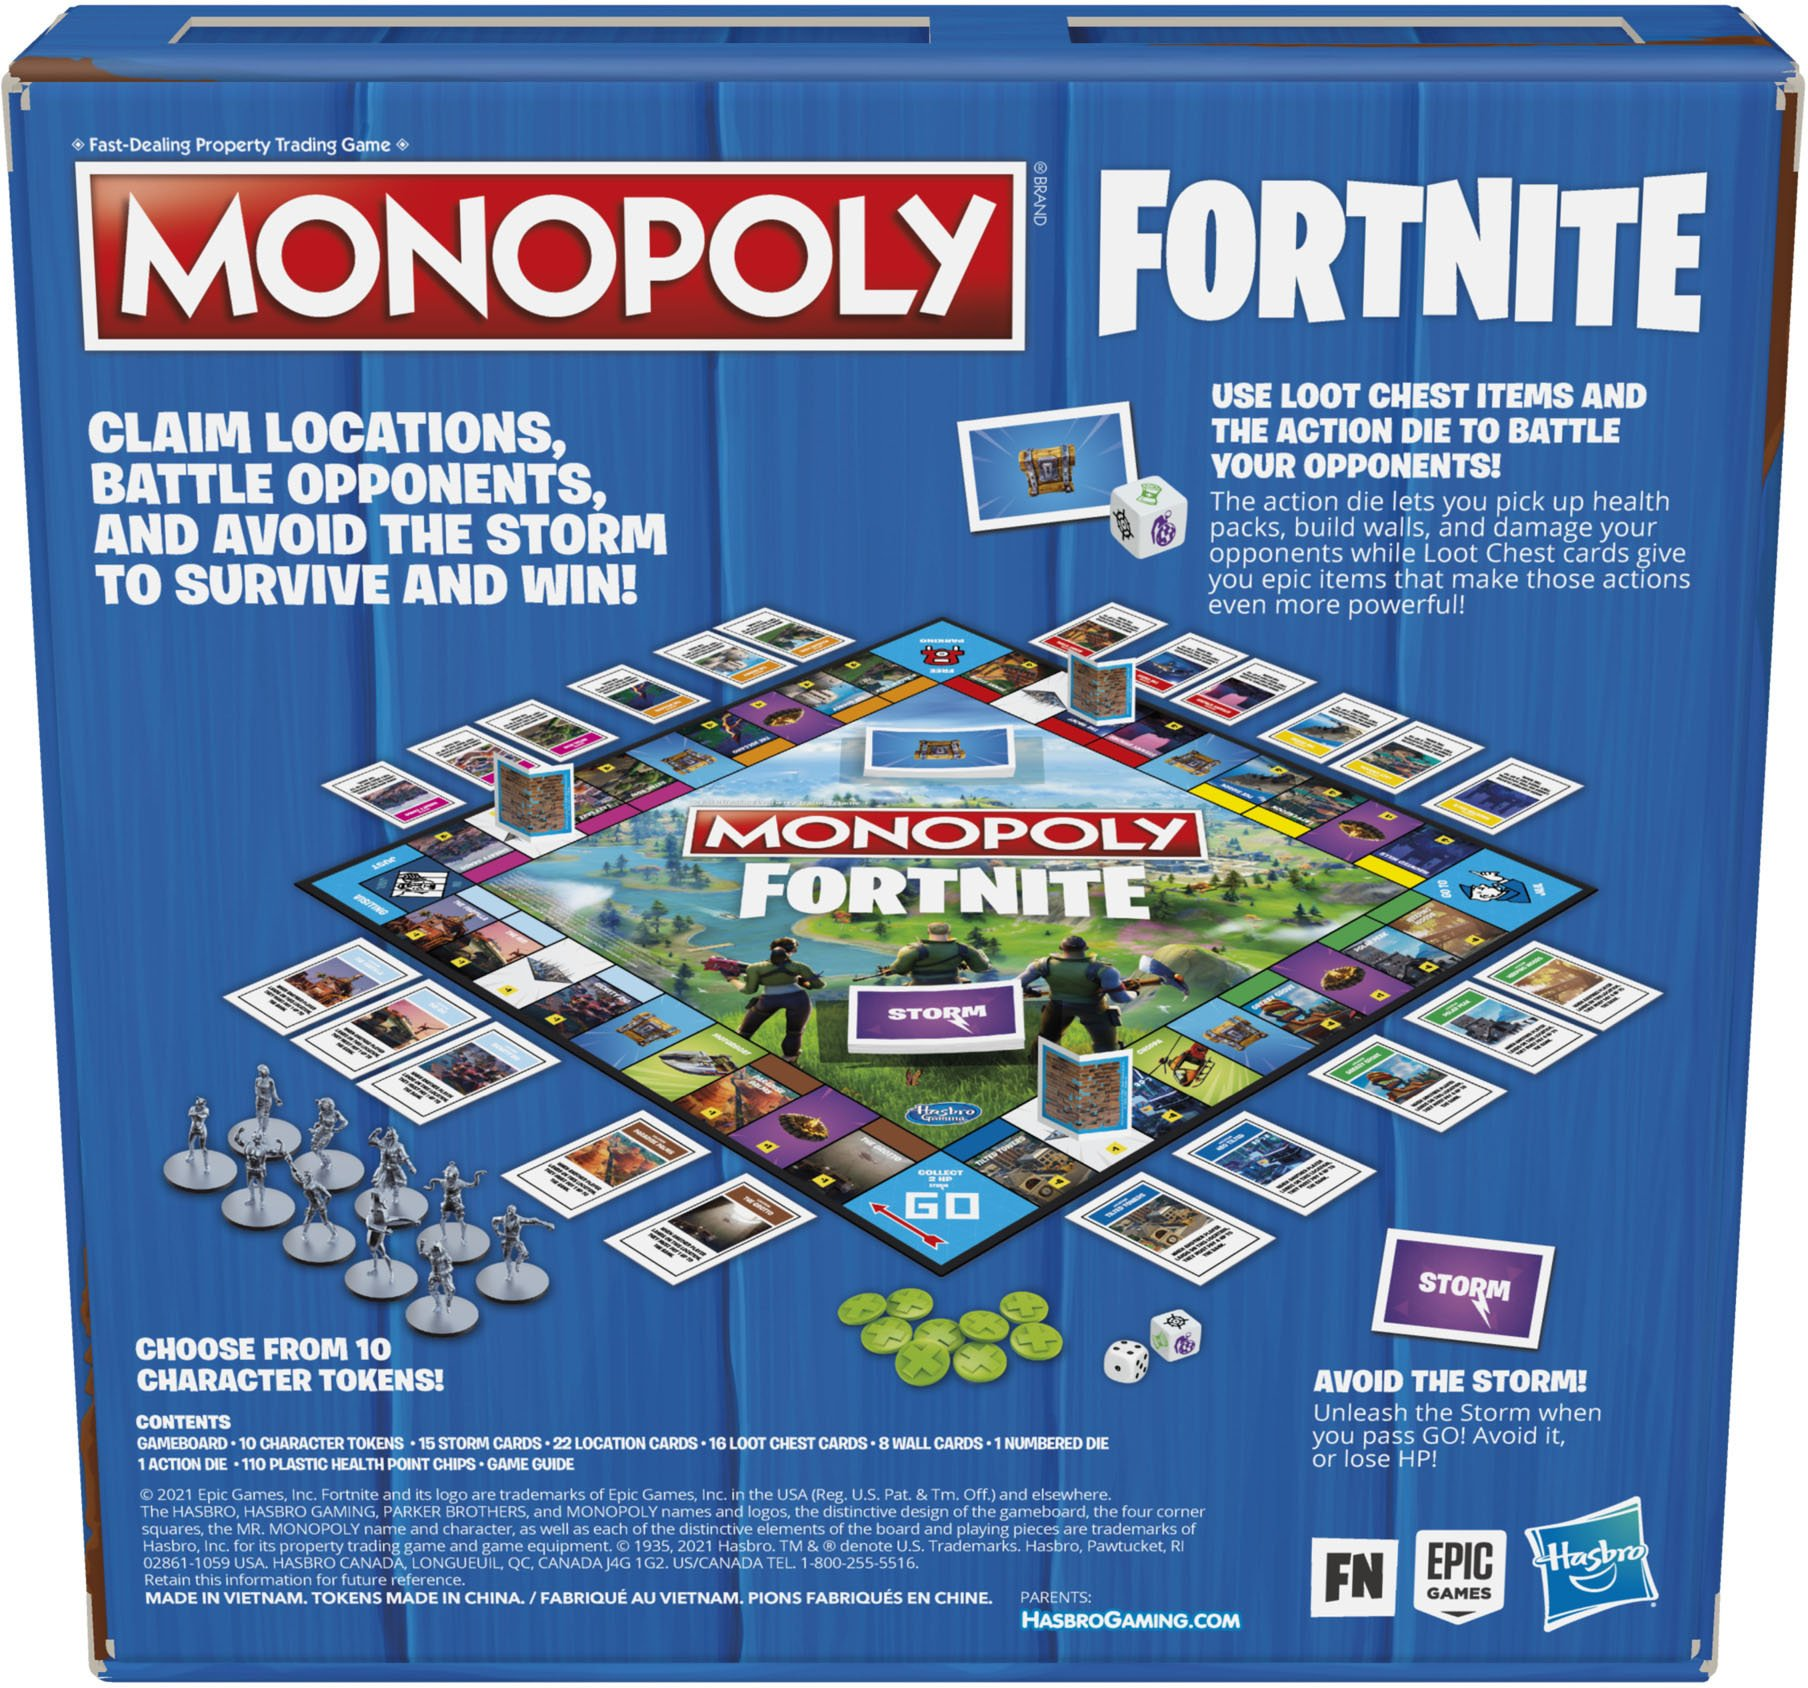 Fortnite reveals new Monopoly Board Game with early access to unreleased Items